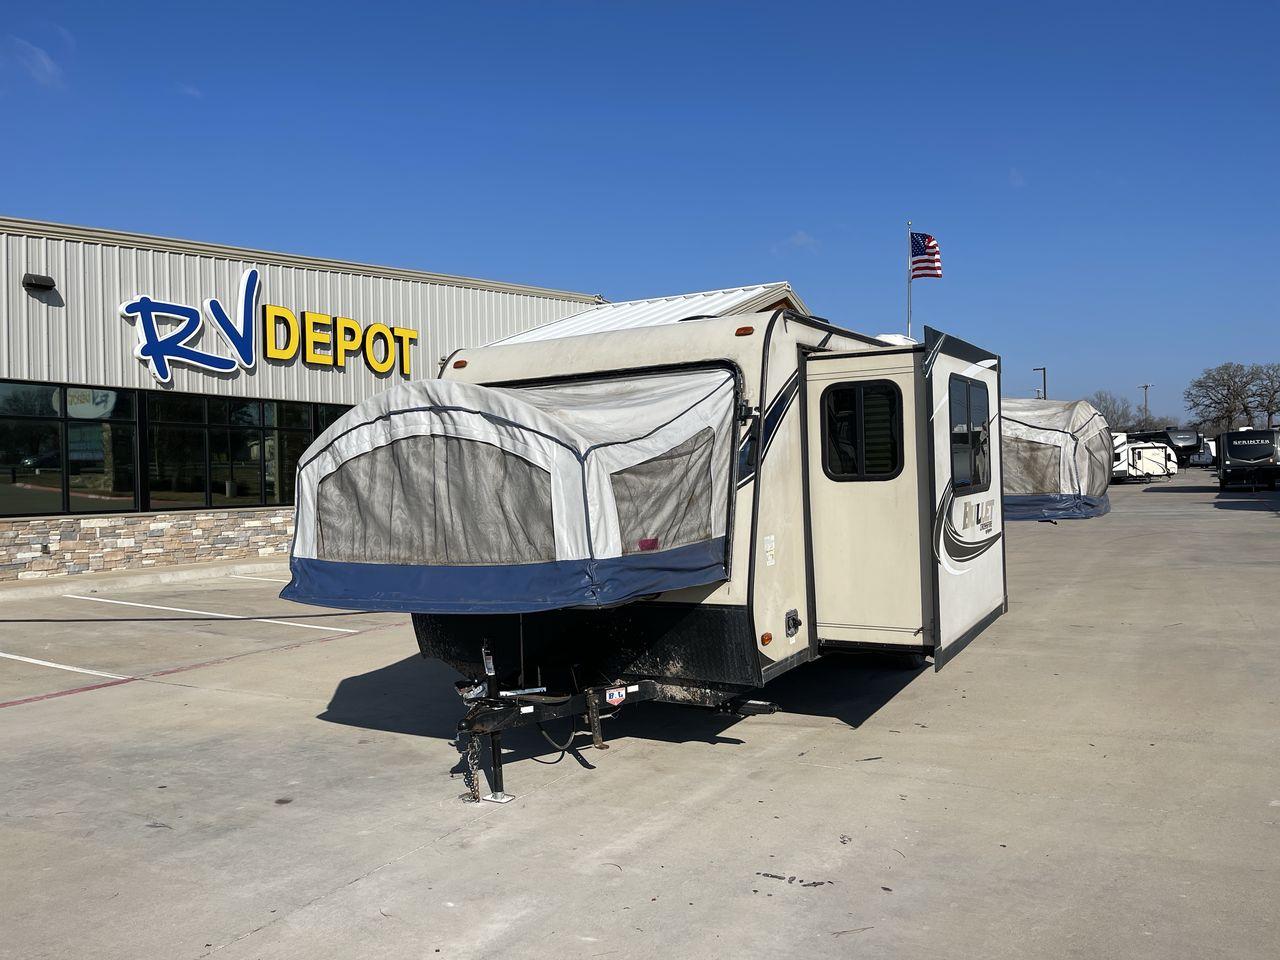 2018 BULLET CROSSFIRE 2190EX (4YDT21923JT) , Length: 25.08 ft. | Dry Weight: 4,410 lbs. | Gross Weight: 6,300 lbs. | Slides: 1 transmission, located at 4319 N Main St, Cleburne, TX, 76033, (817) 678-5133, 32.385960, -97.391212 - The 2018 Bullet Crossfire 2190EX is a lightweight vacation trailer that can be used for a variety of activities. This trailer is 25.08 feet long and weighs 4,410 pounds dry. It is easy to pull and move, which makes it great for both short trips and longer vacations. Even though it's small, the Cross - Photo #0